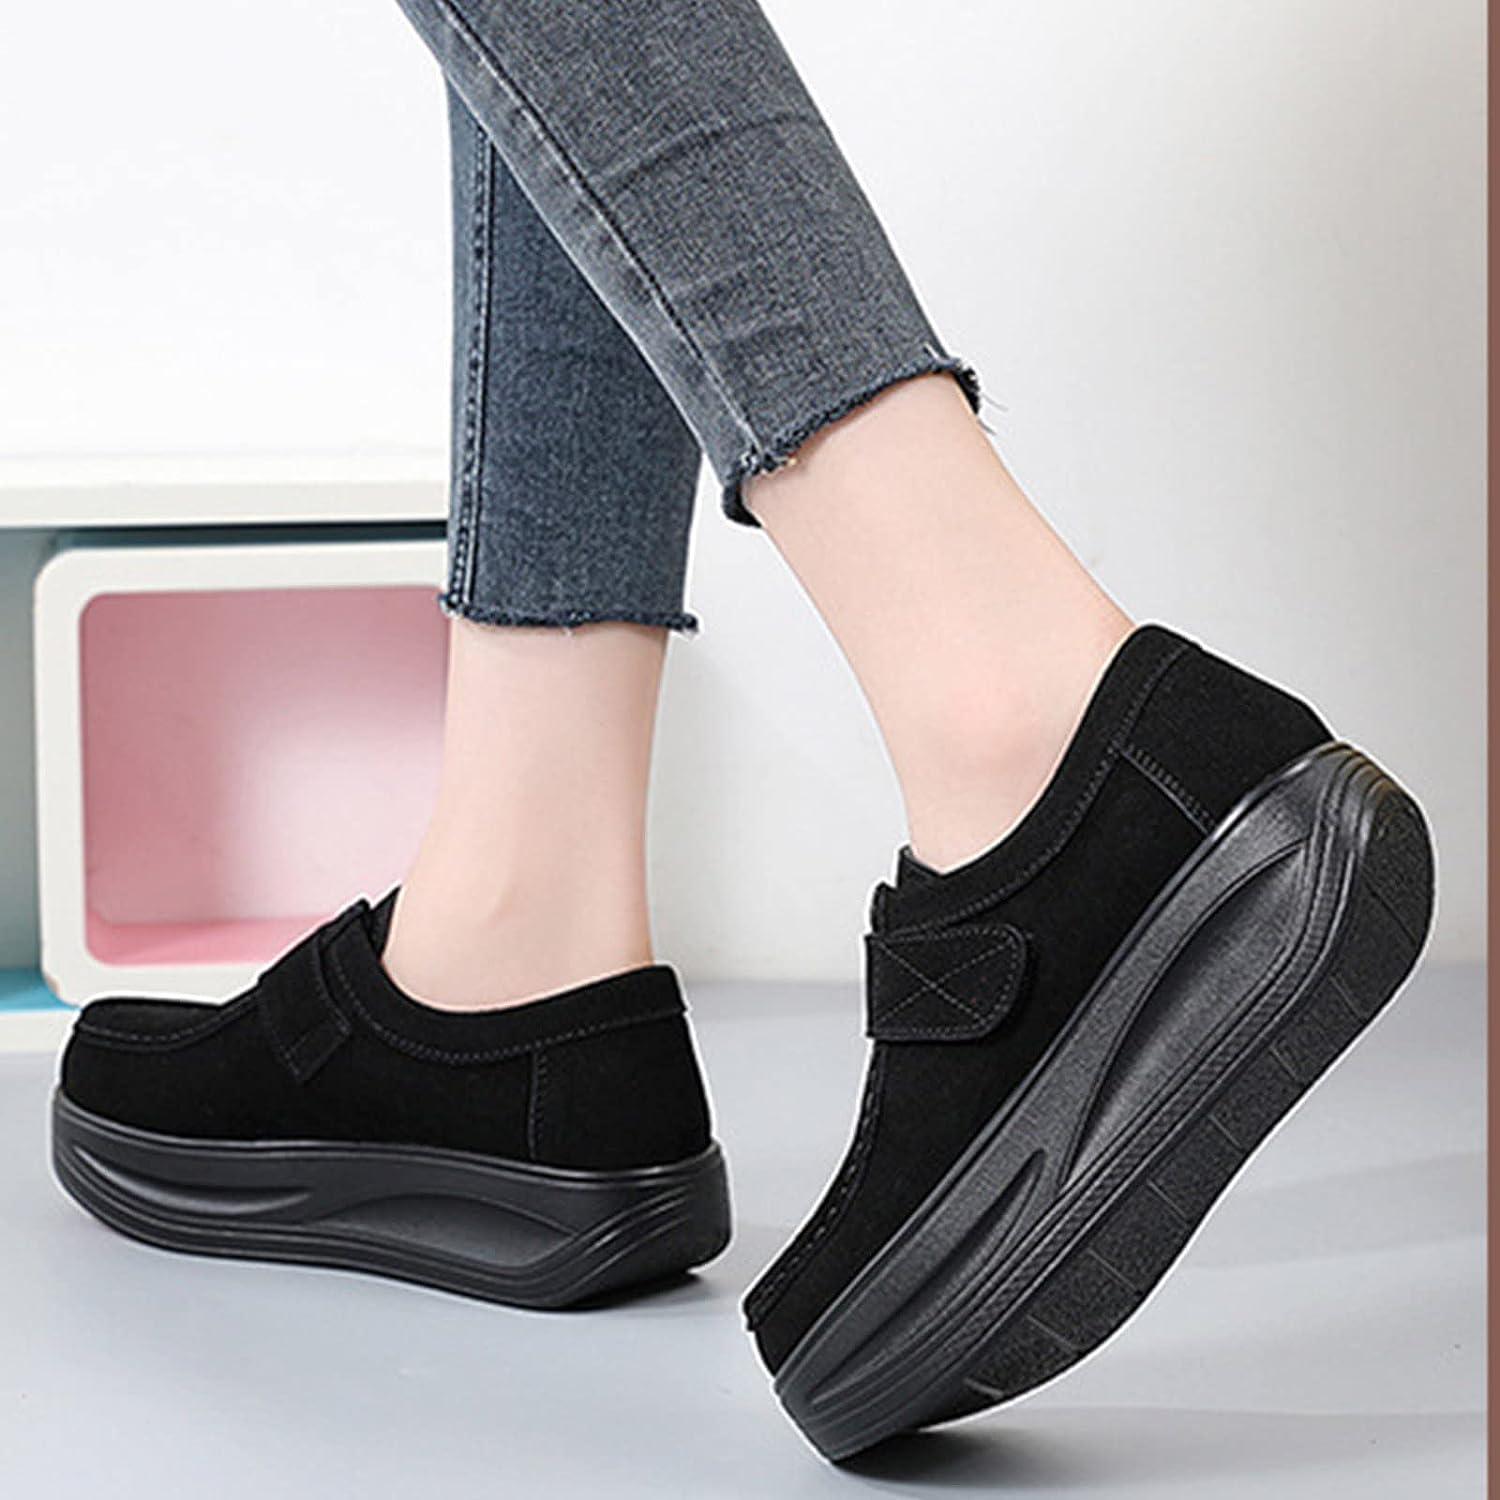 Women's Slip On Shoes, Casuals, Work, Dress